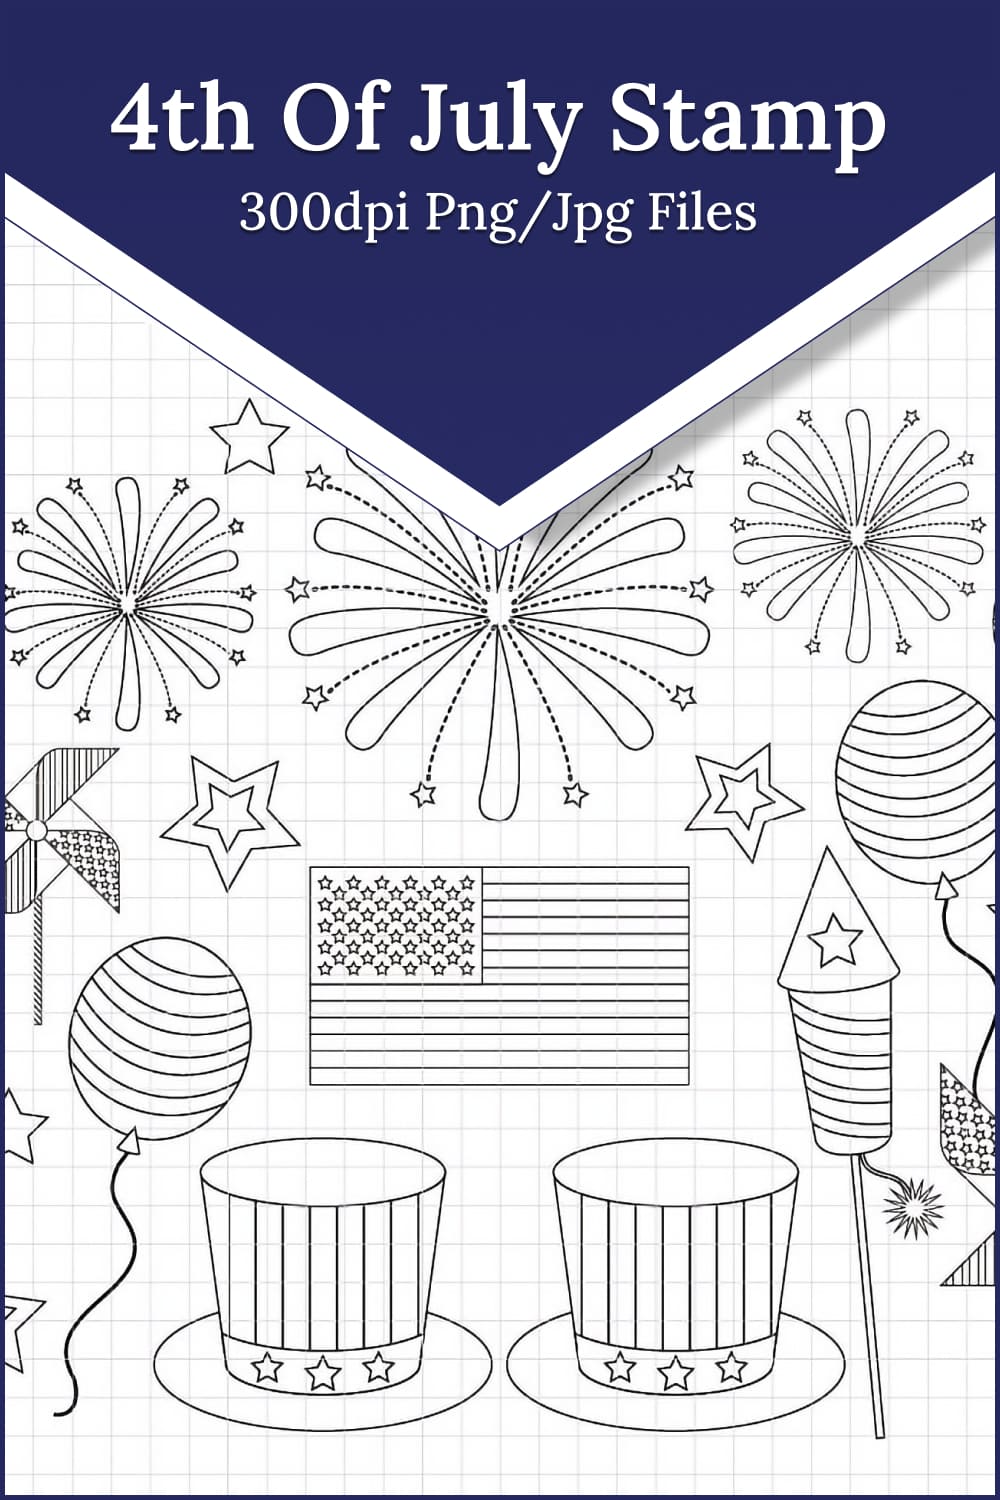 4th of July Stamp (DS41) - Pinterest.